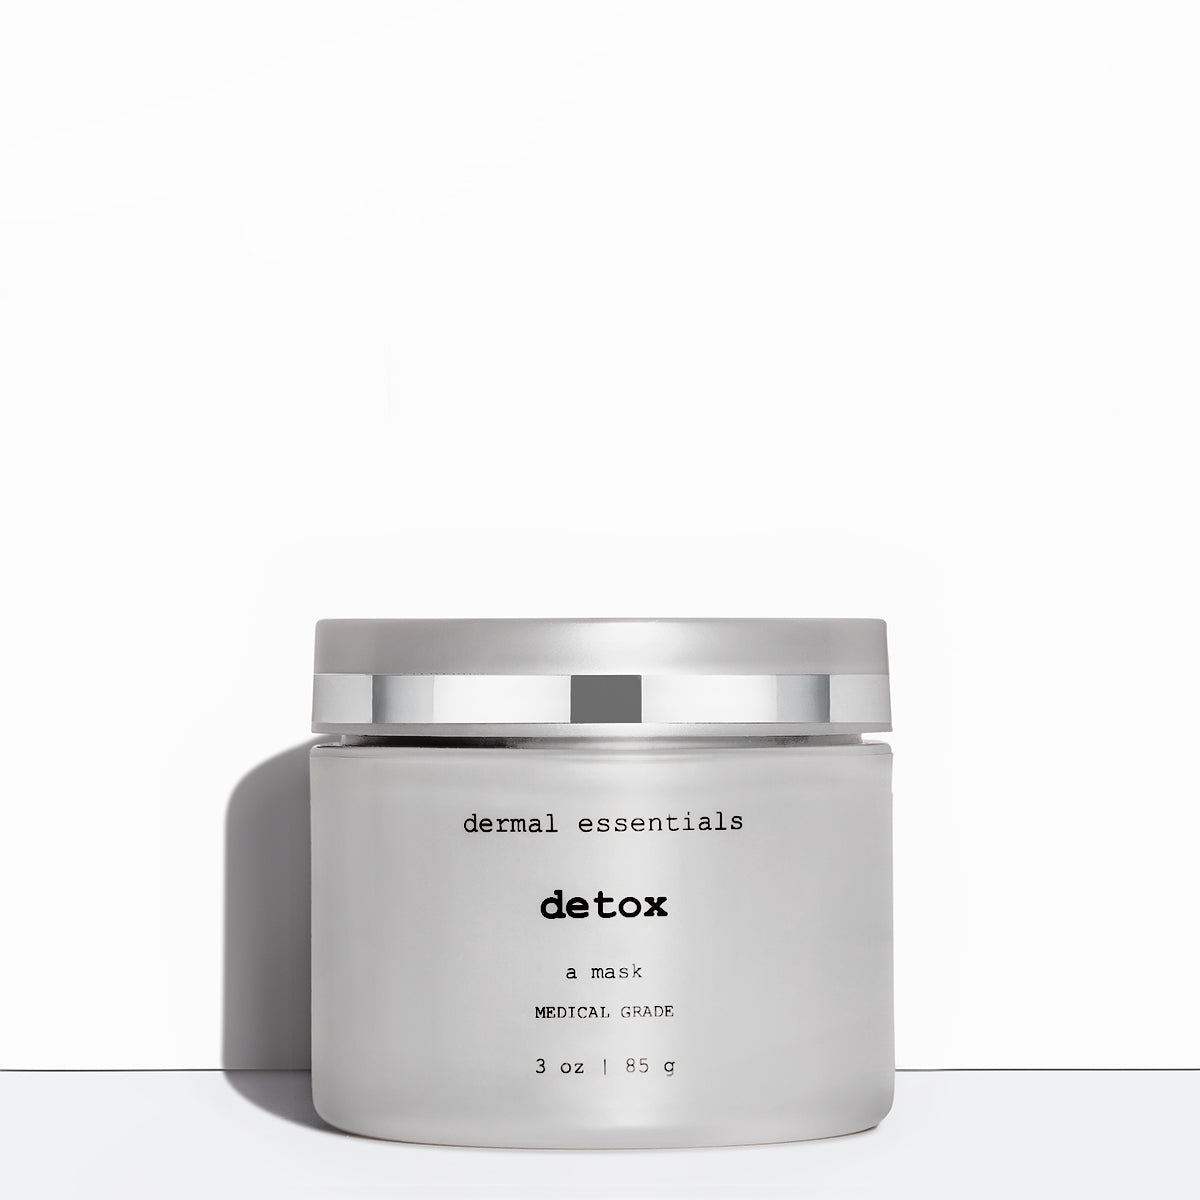 Full size 3 oz. Silver round plastic jar black letters silver round plastic twist lid. Detox is  an acne treatment sulfur mask Dermal Essentials Medical Grade Skincare. A mini size is 5 ml of this acne treatment sulfur facial skincare product  in a round clear plastic jar white label with black letters white screw lid.